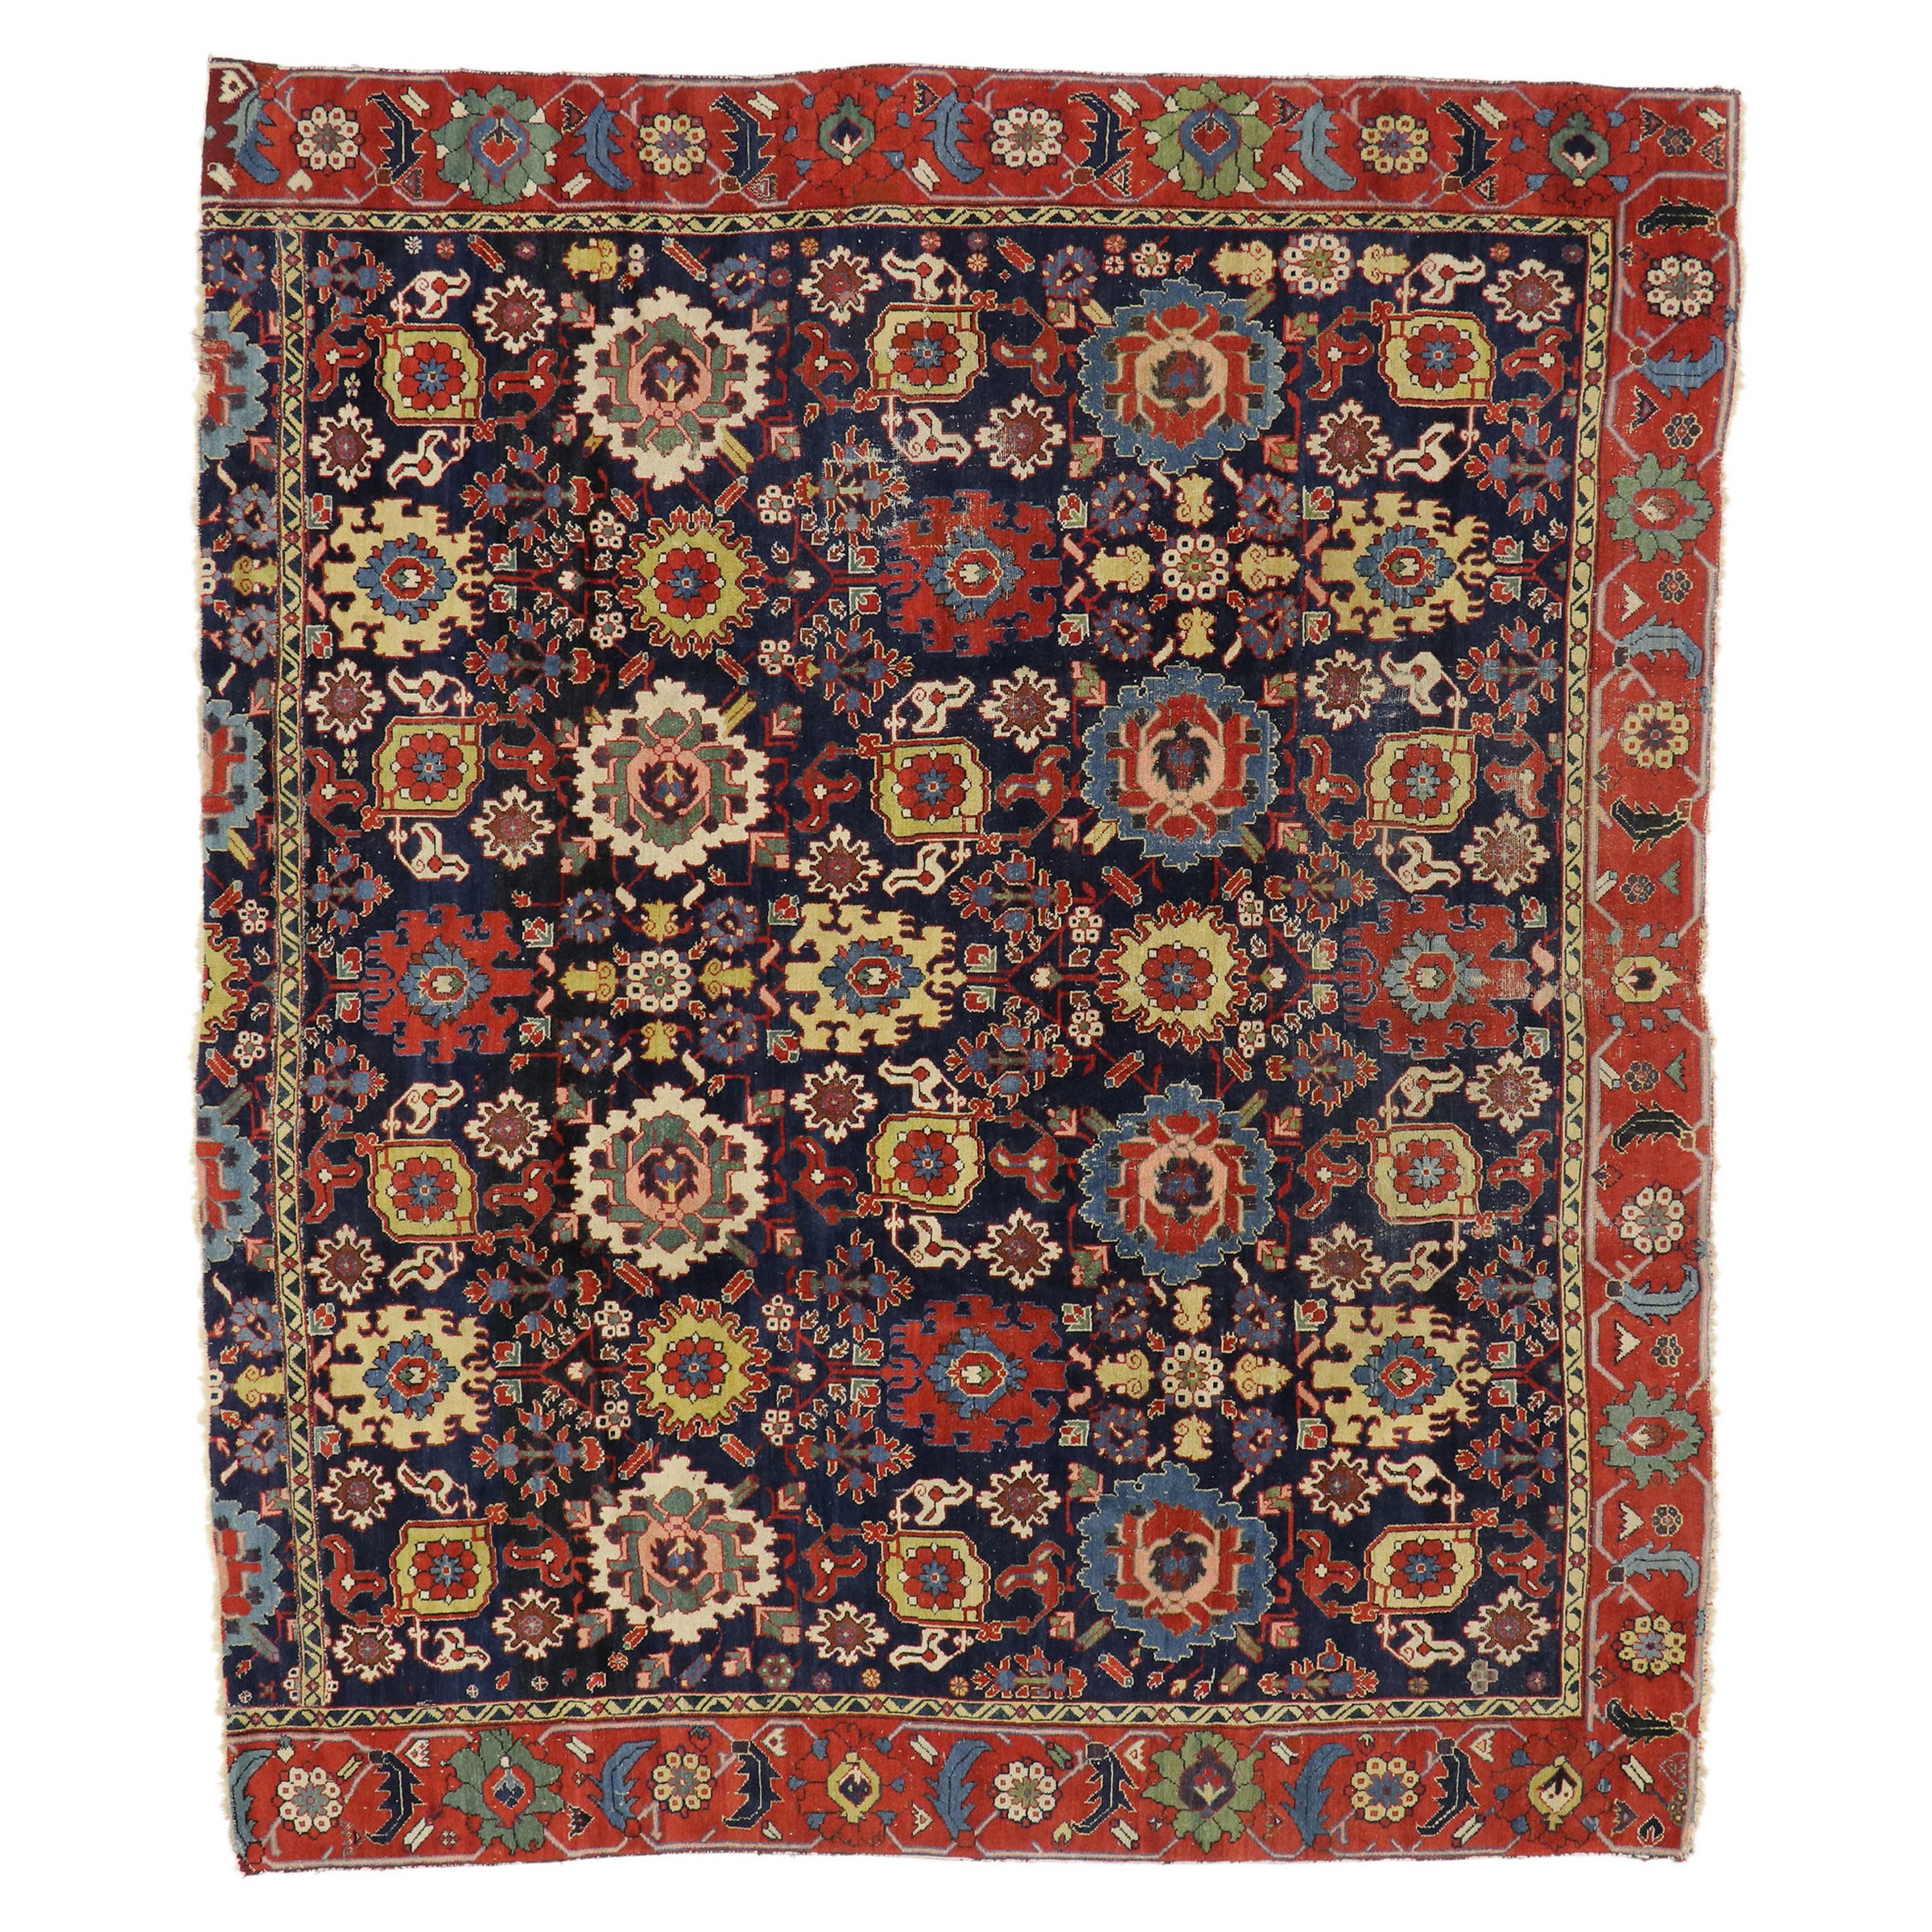 Early 19th Century Antique Caucasian Azerbaijan Rug with Harshang Design